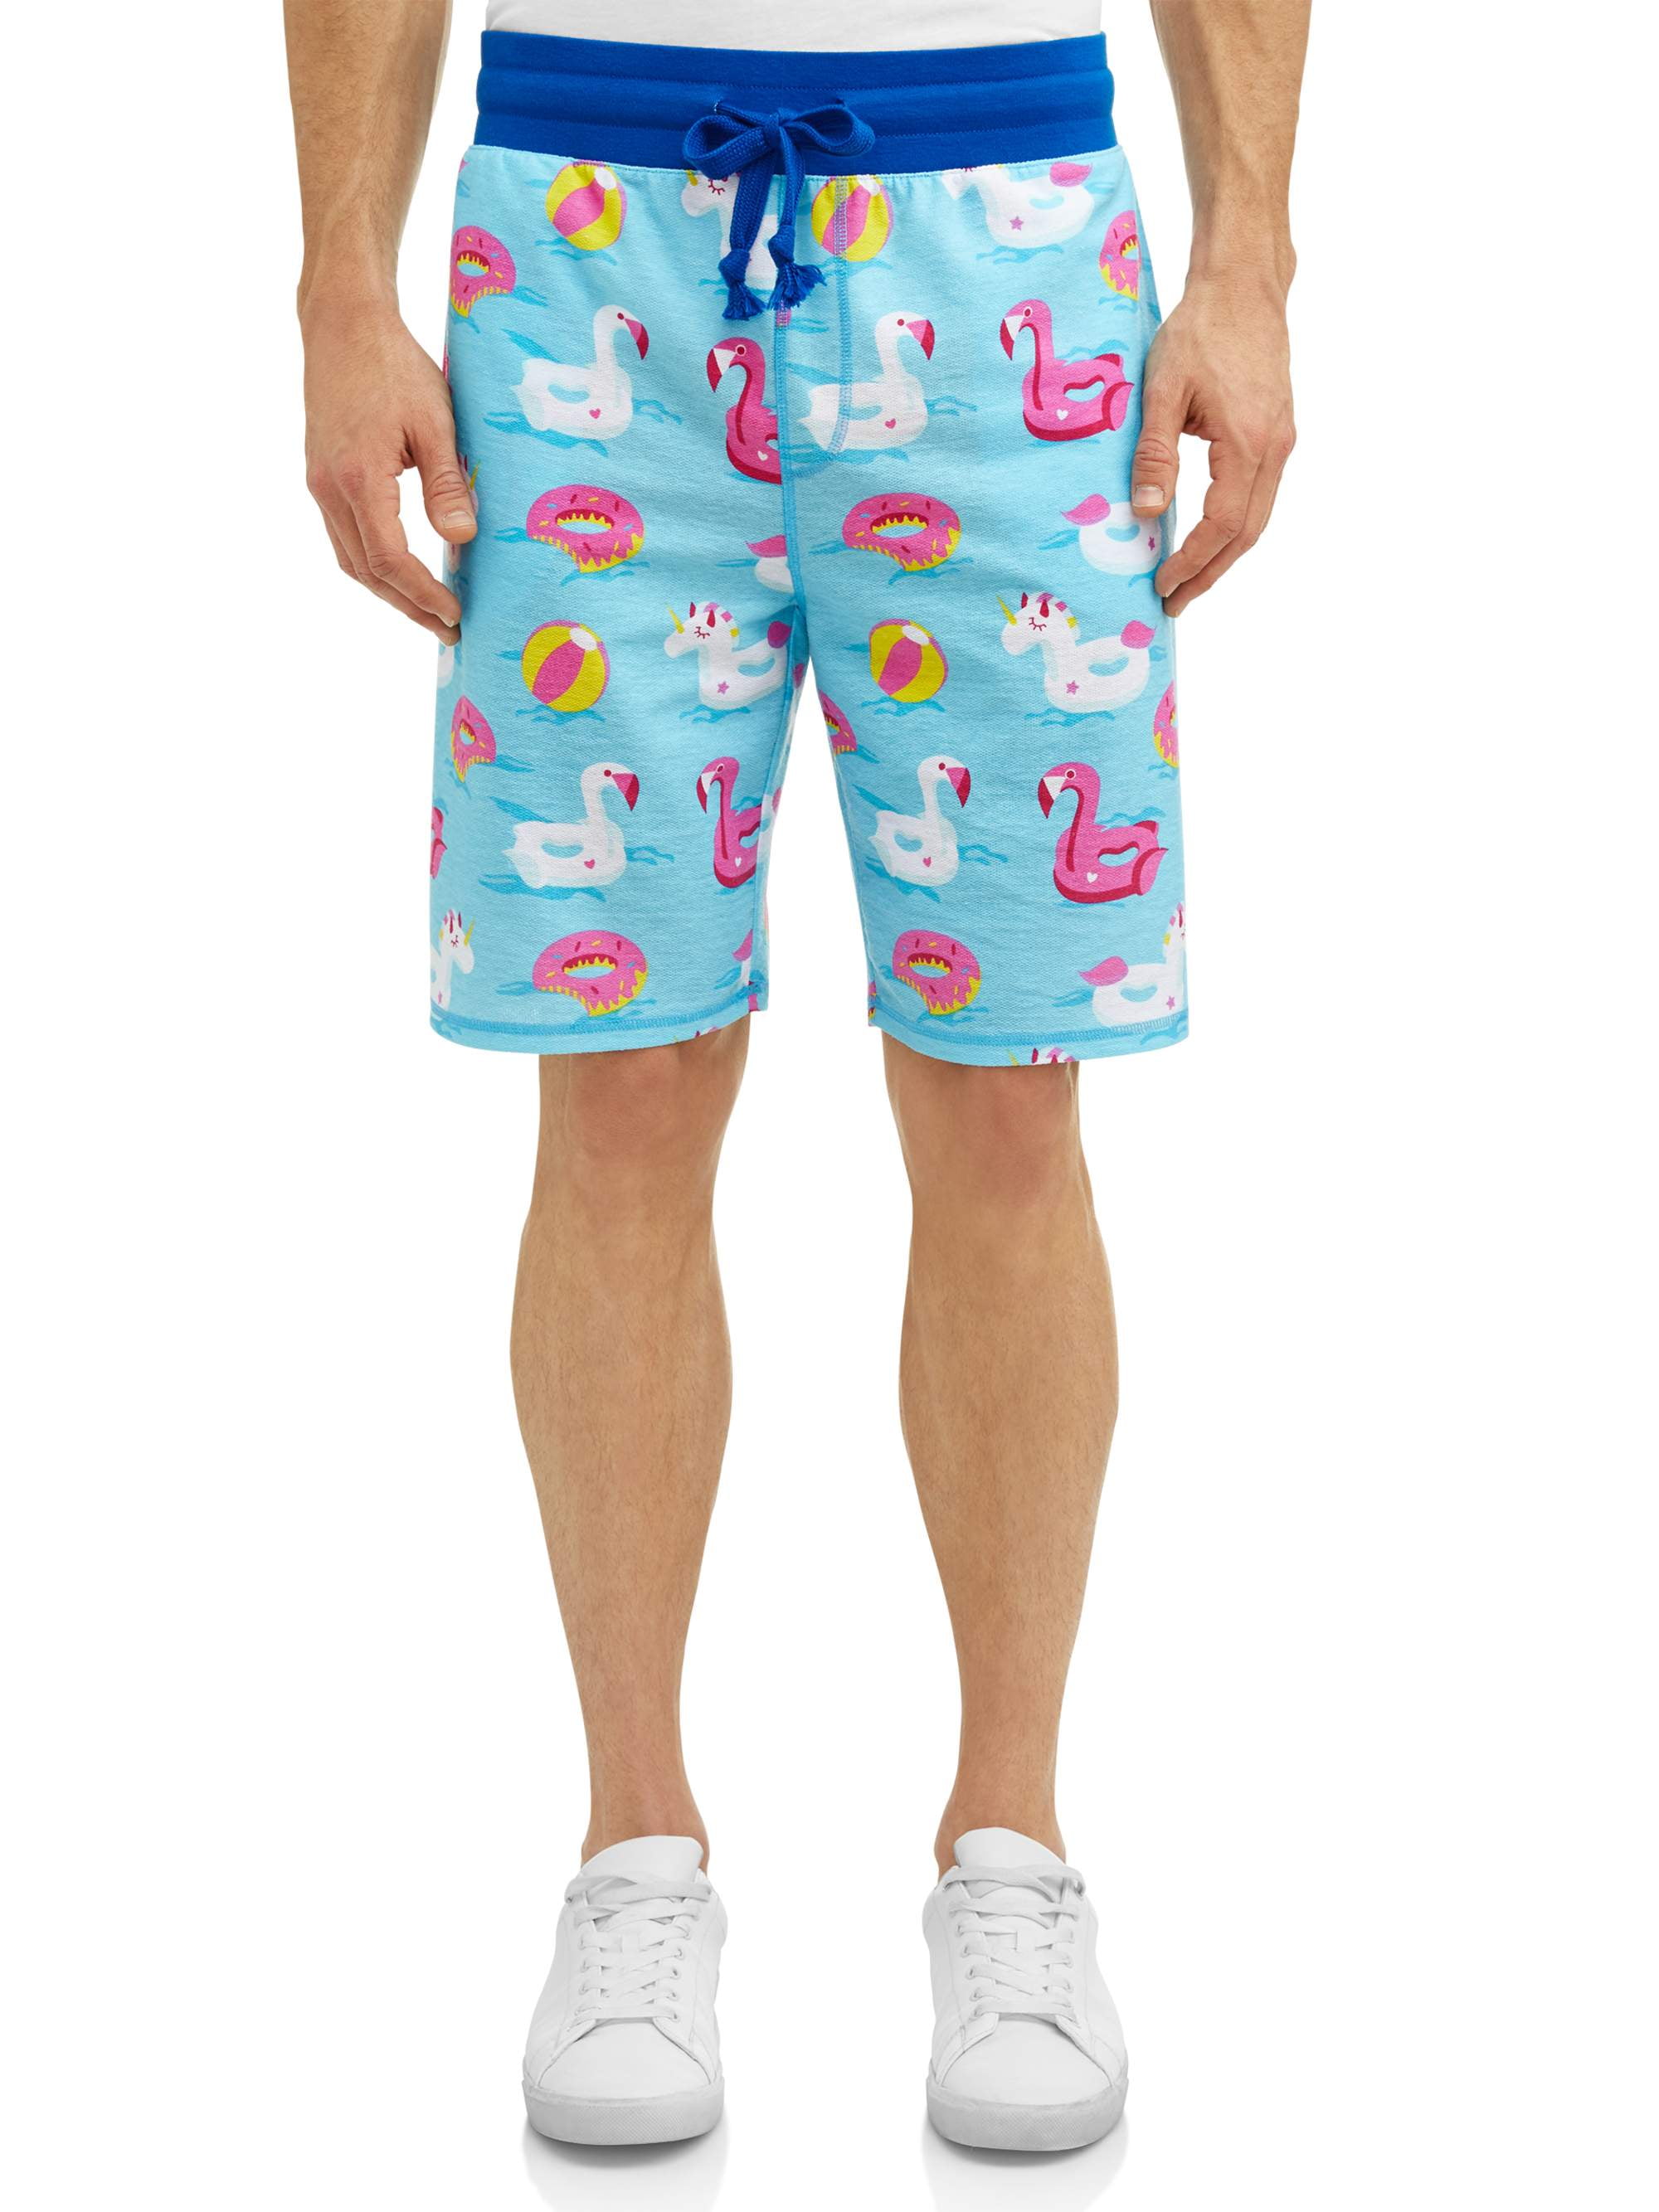 JERECY Mens Swim Trunks Cute Cat Unicorn Donuts Rainbow Pattern Quick Dry Board Shorts with Drawstring and Pockets 